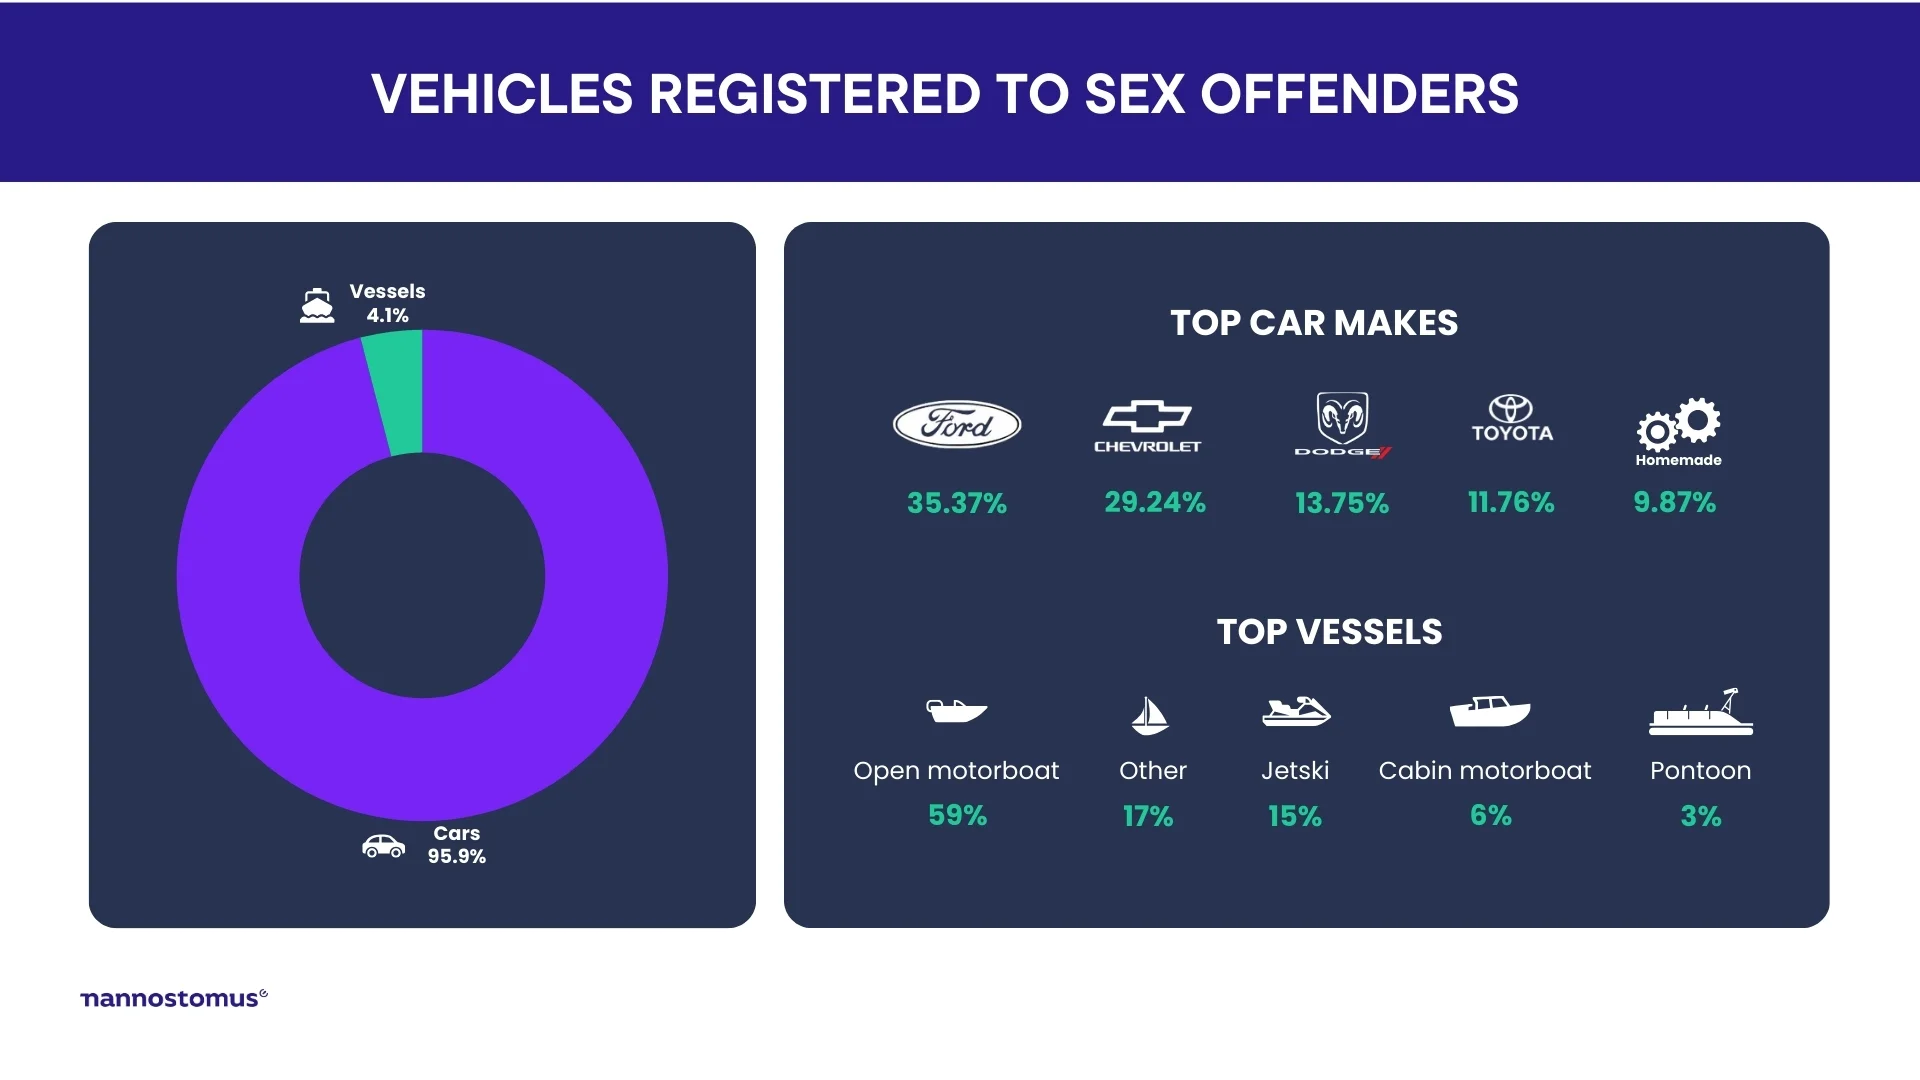 USA sexual offenders list of vehicles